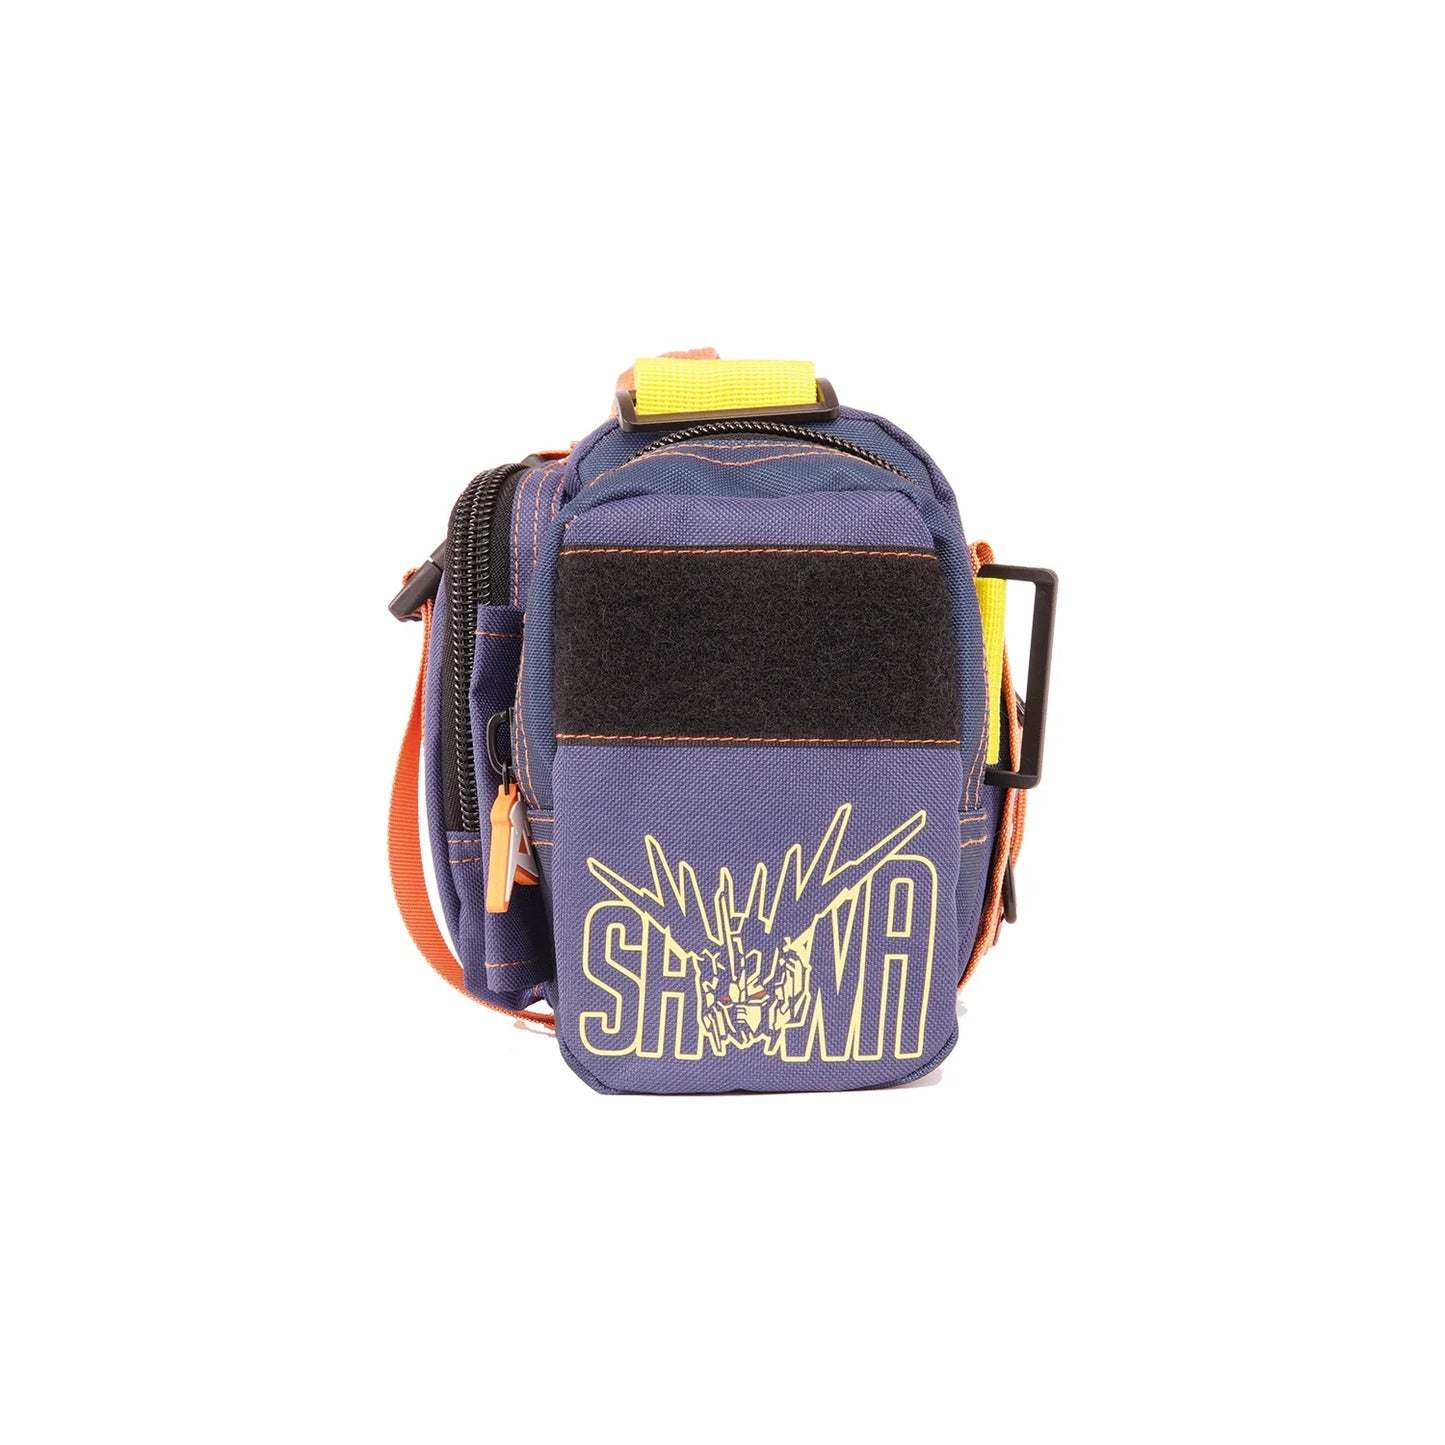 SHWA - Banshee Mini Duffle with Strap (Pre-Order) Patches Included